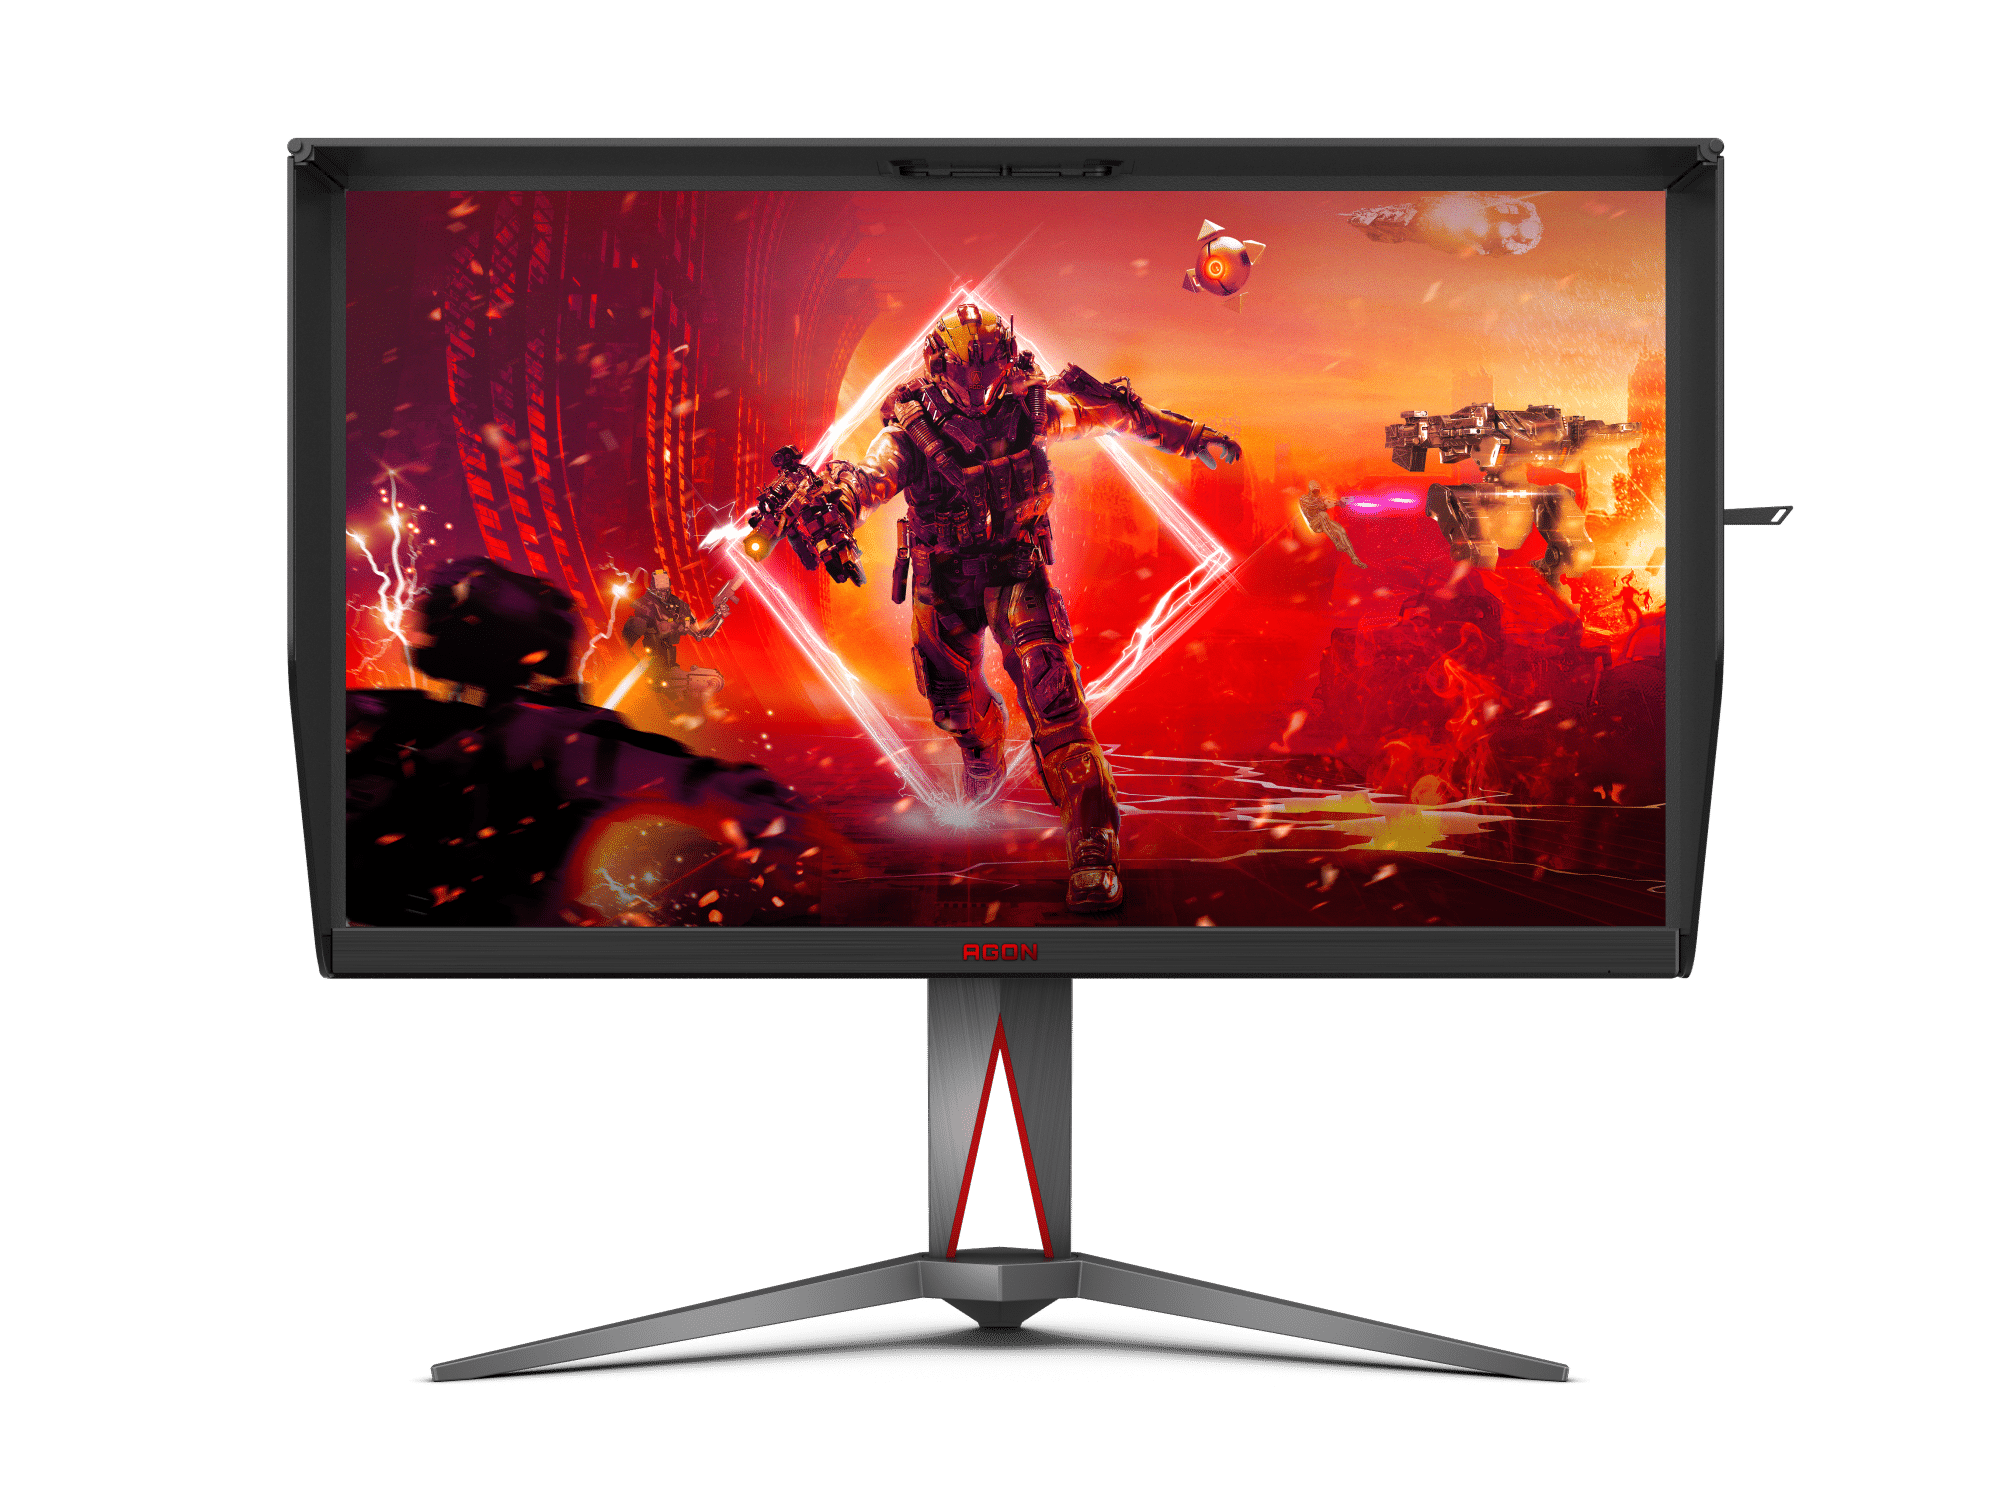 AOC Announces New AG275FS Monitor with FHD 360Hz Specification - TechGoing